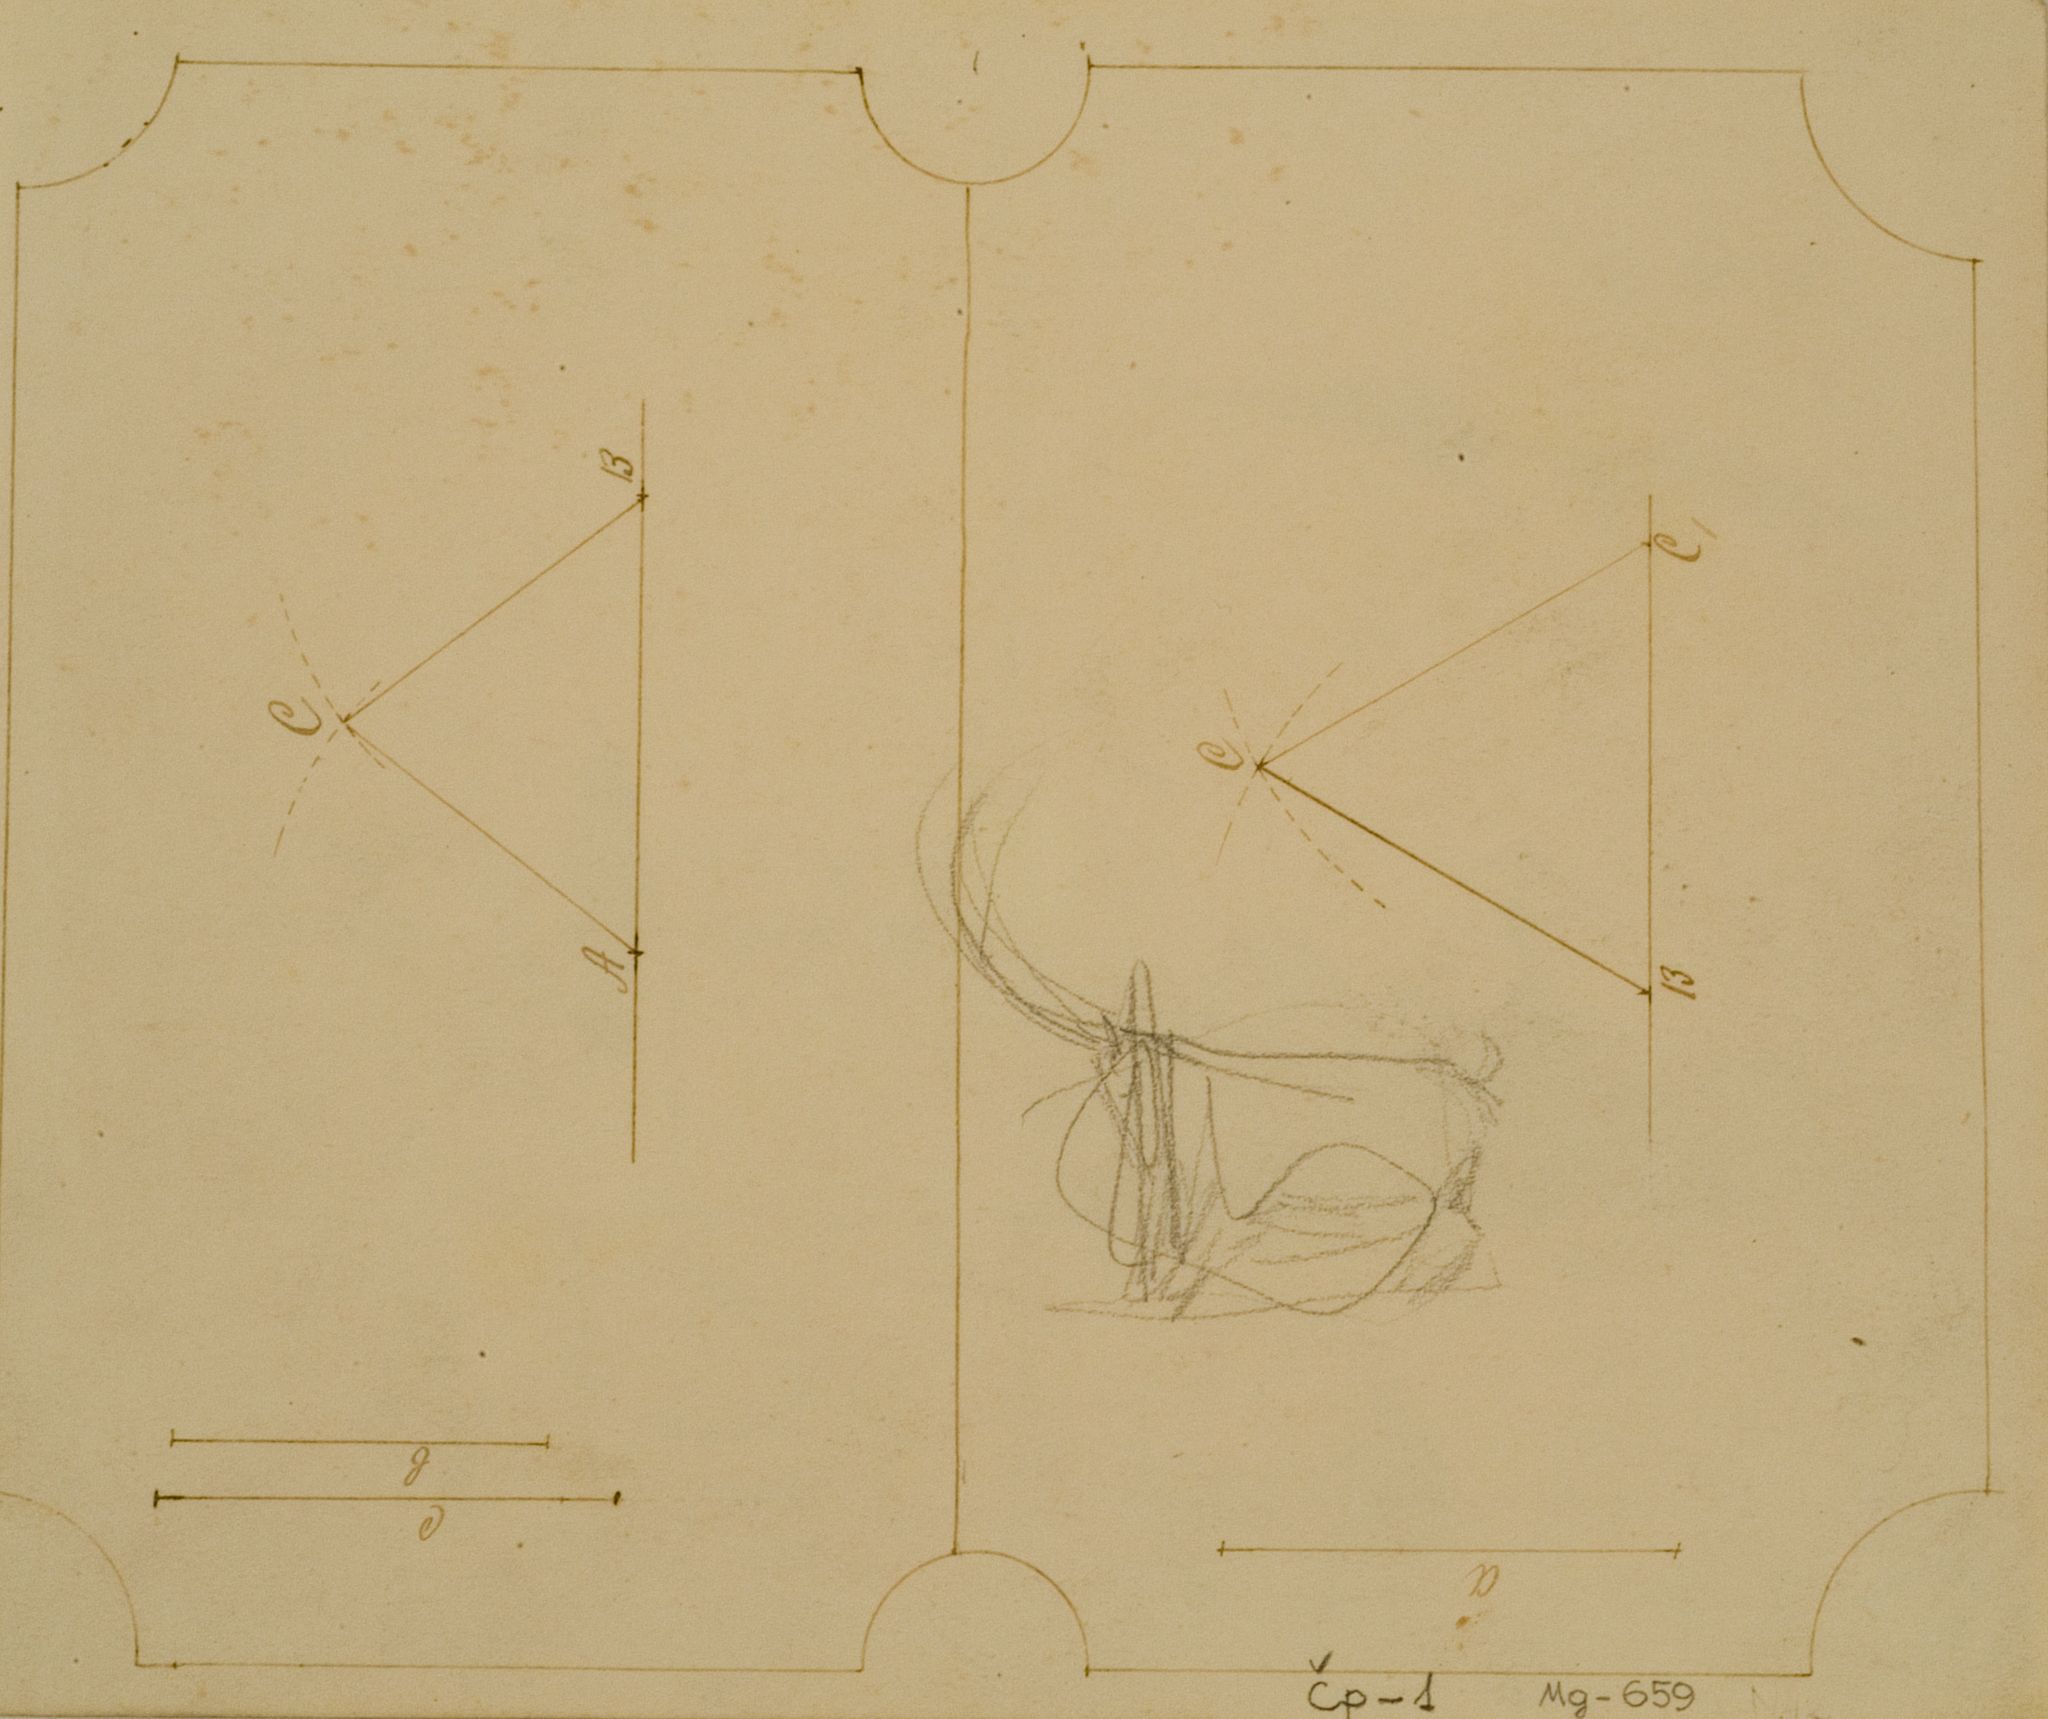 Image for: Sketch of a Goat and a Fragment of work drawings of Brother Stasys